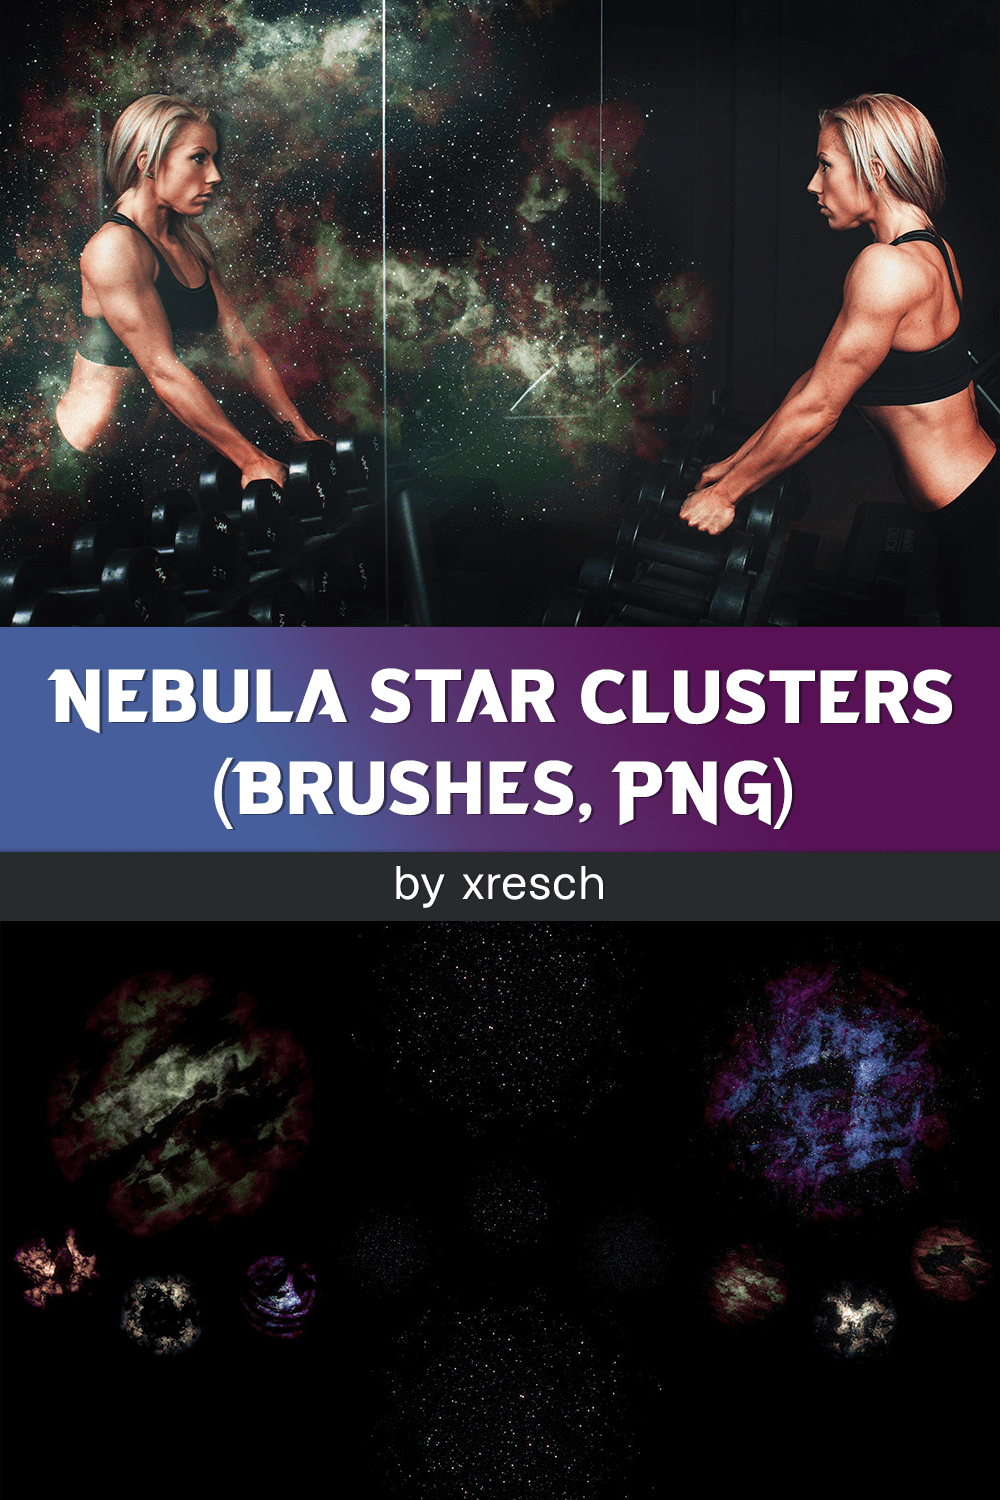 Nebula Star Clusters (Brushes, PNG).